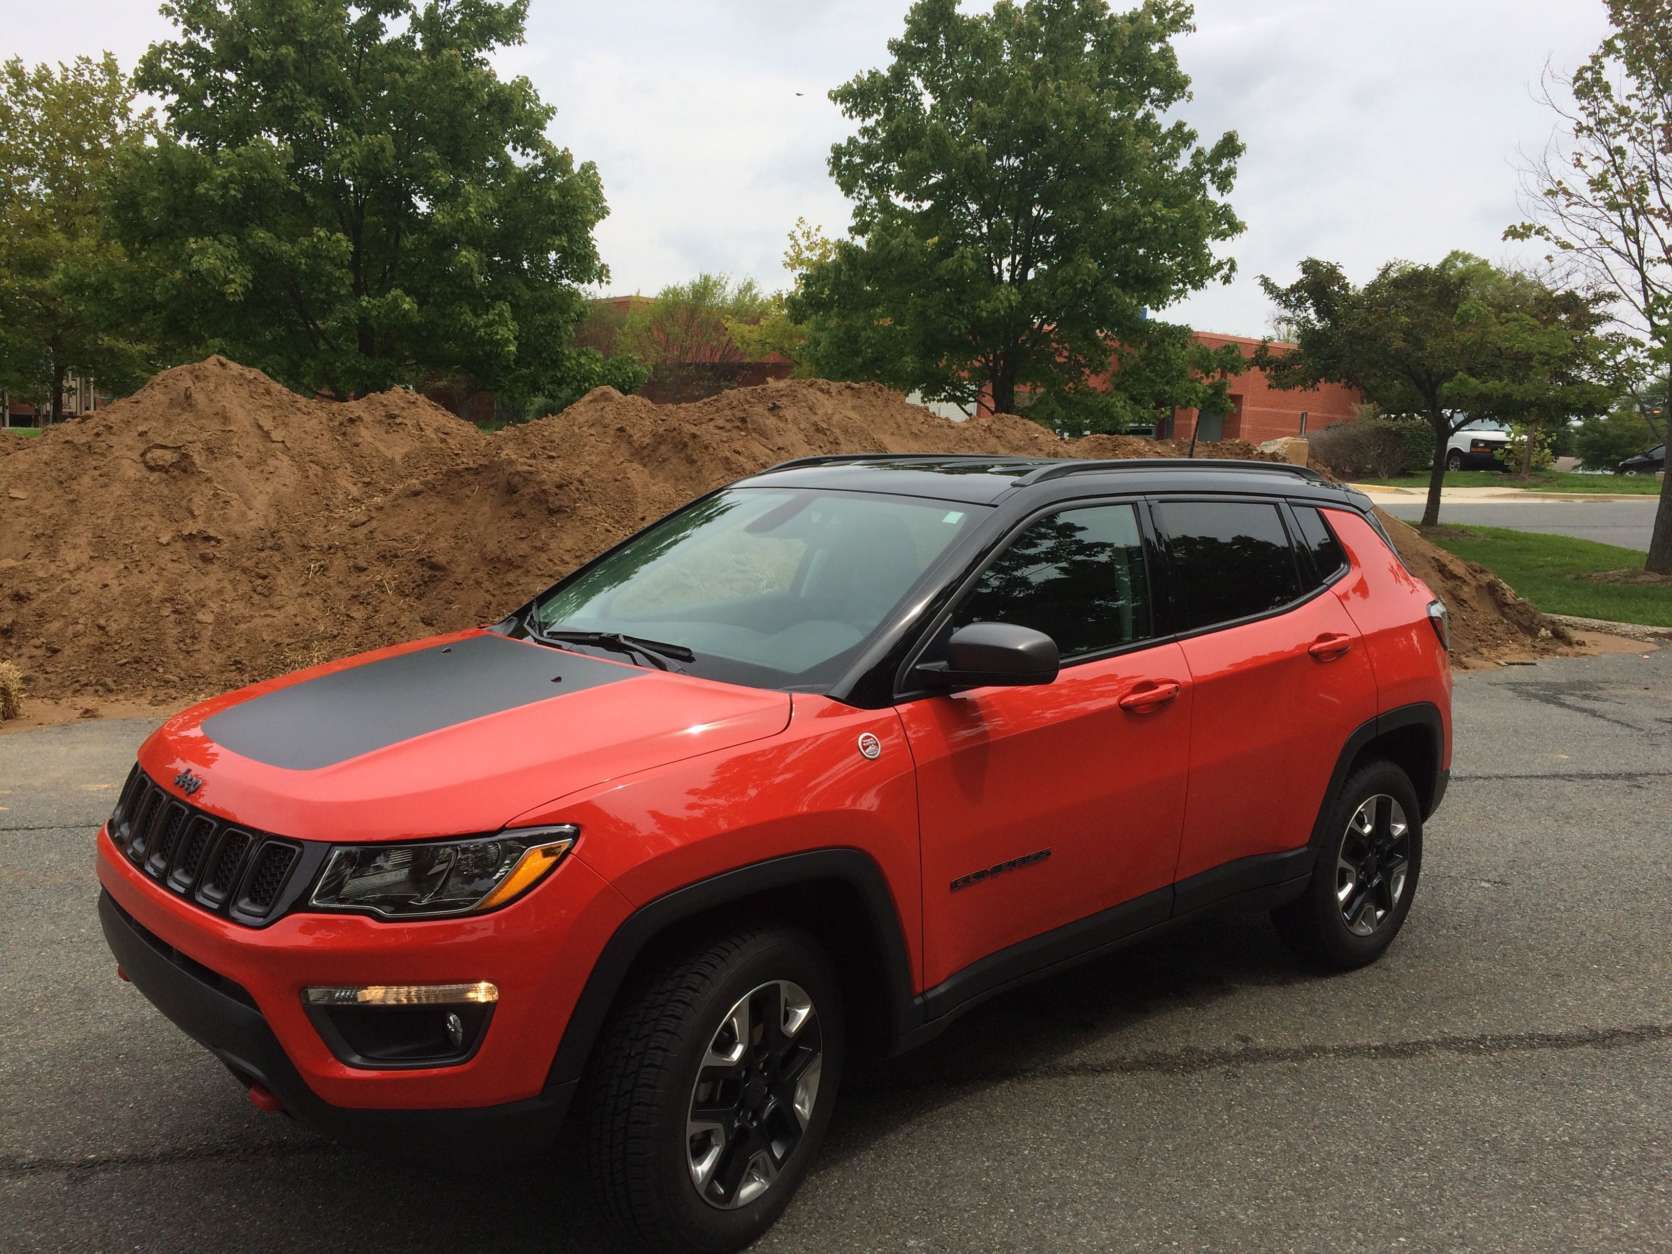 The Jeep rides higher than most small crossovers. There is a black roof and dual hood color that looks nice with the Spitfire orange color. Red tow hooks front and back add to the off road cred.(WTOP/Mike Parris)